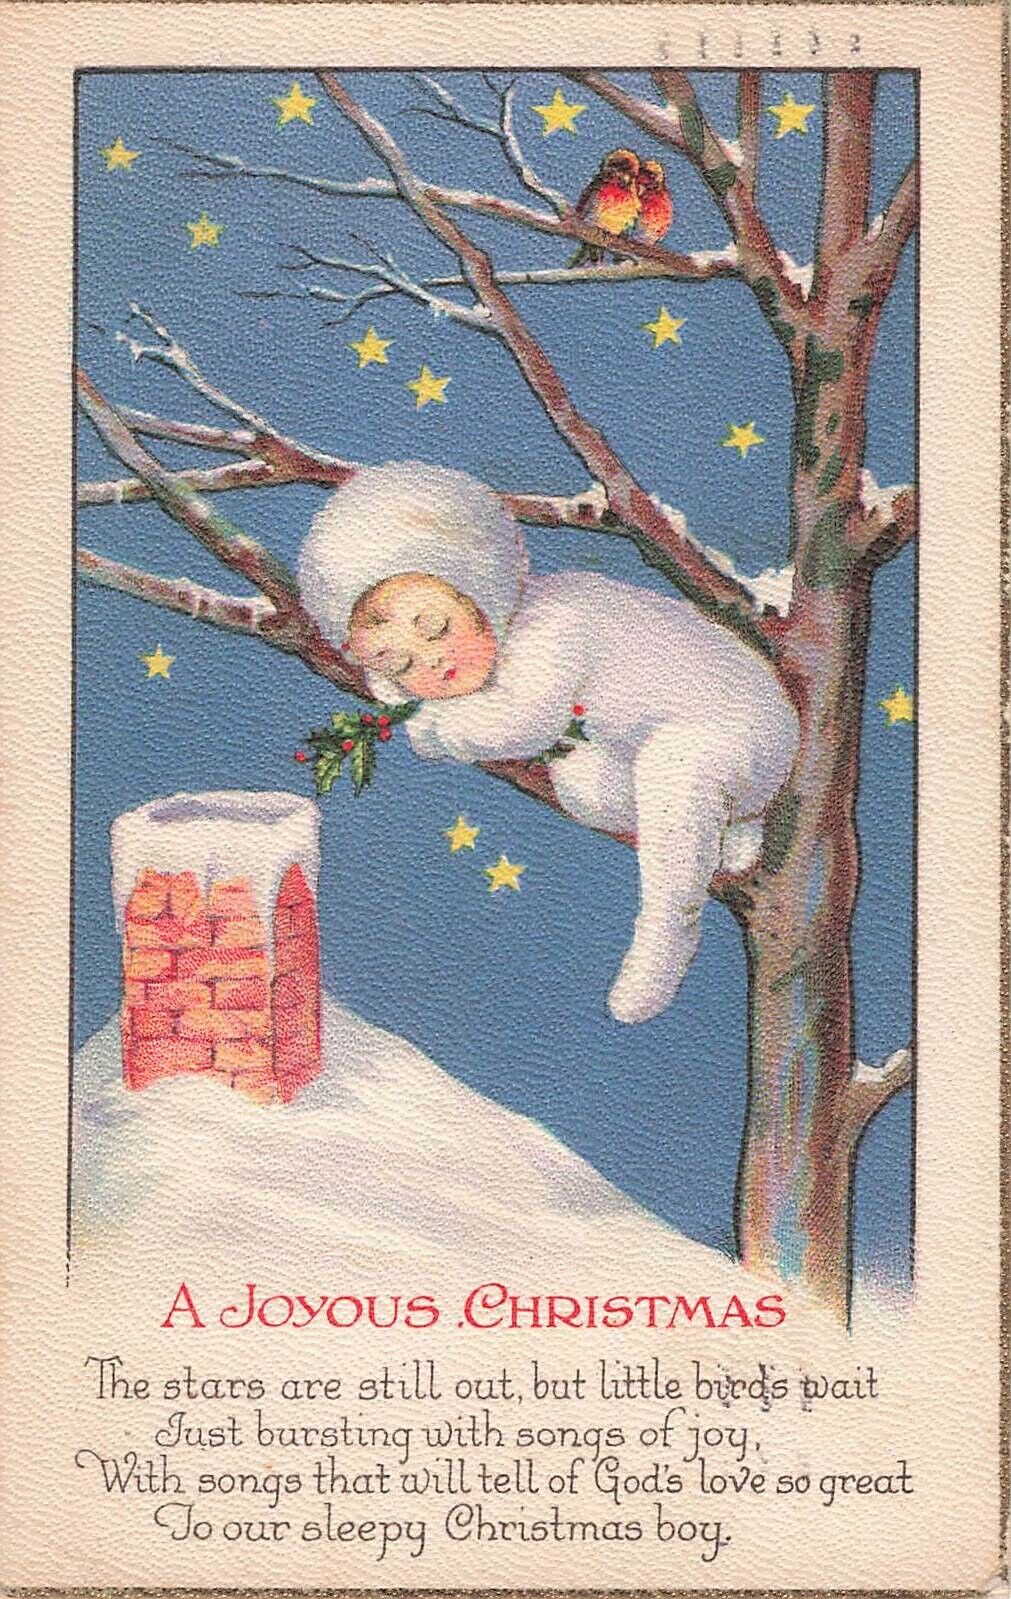 Christmas Postcard Boy and Birds in a Tree with Stars  PM 1923   W5